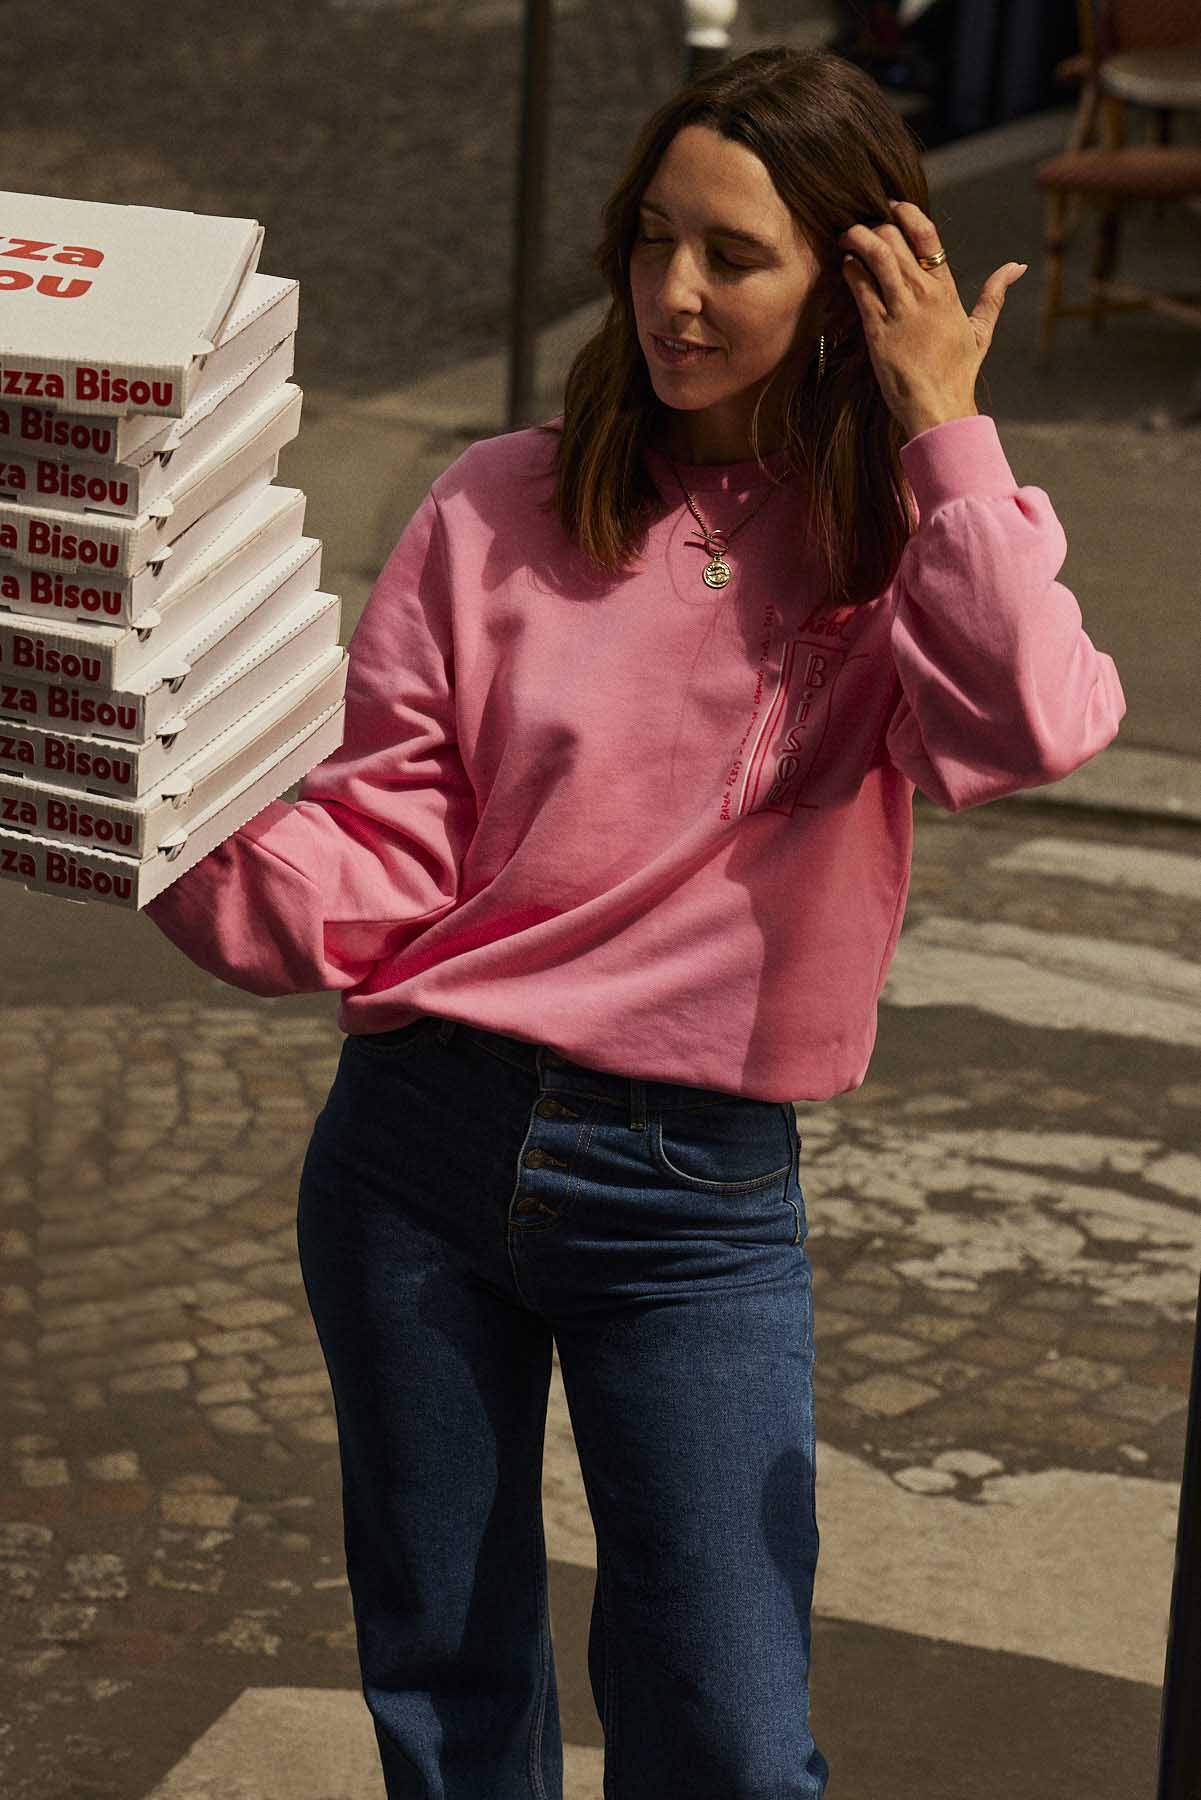 Sweat-shirt Anvers Hotel bisous rose et rouge